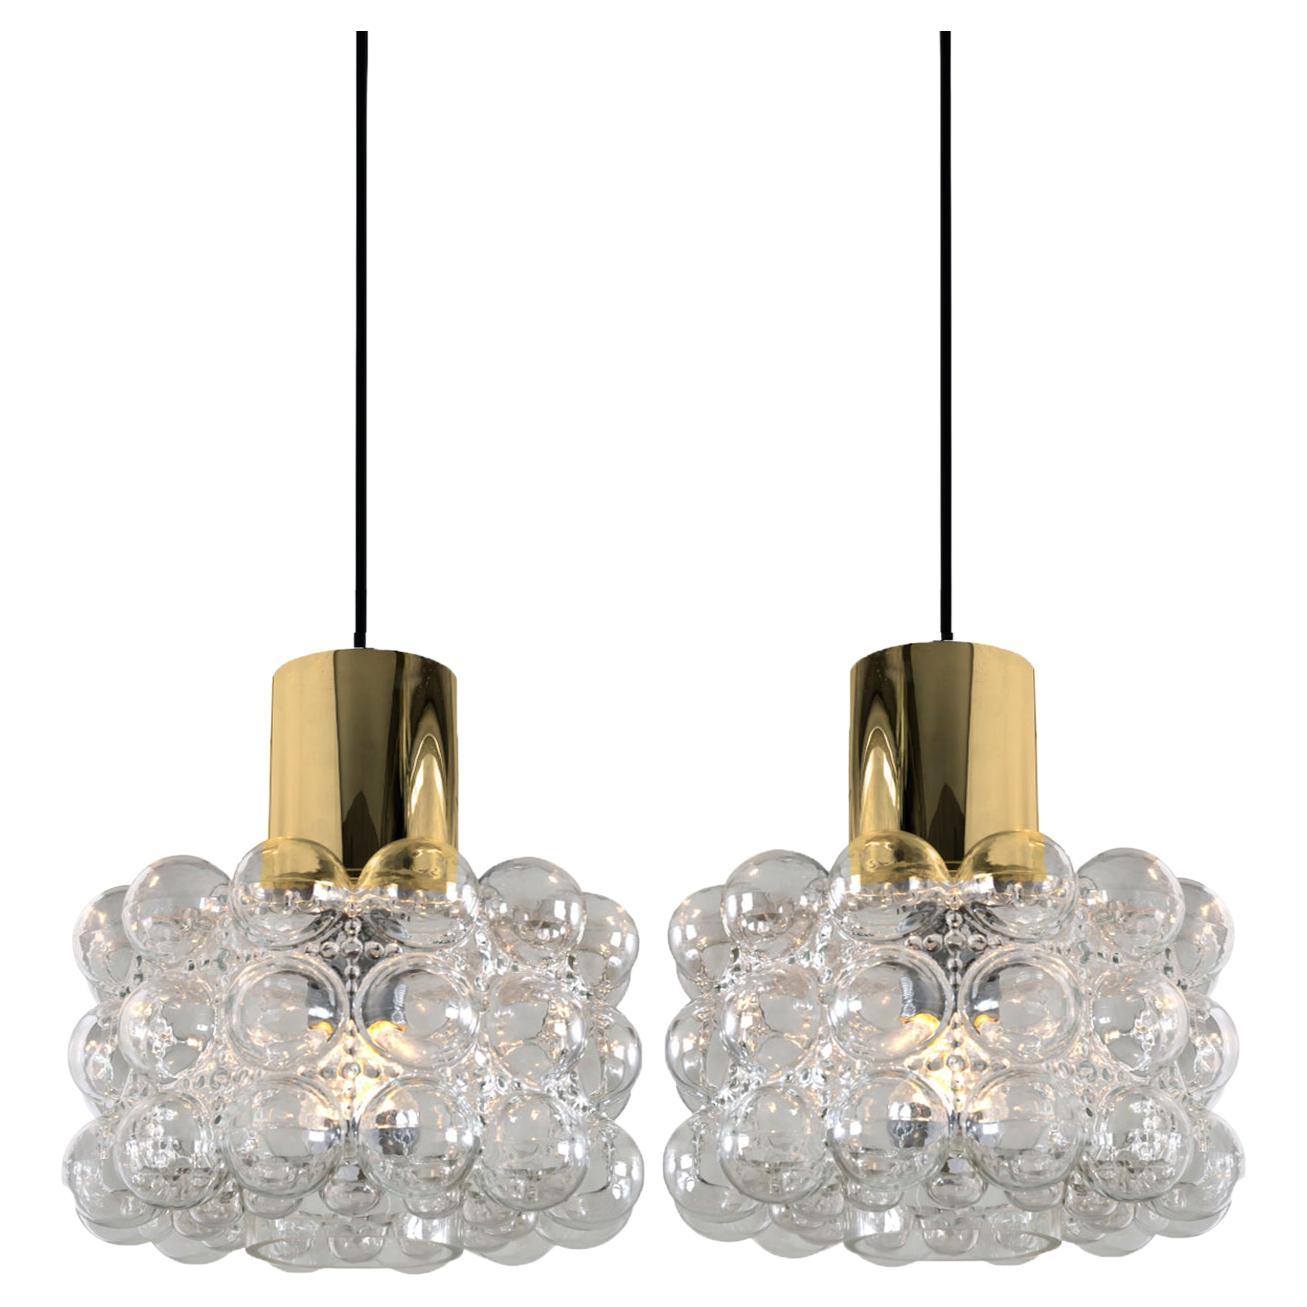 Pair of Beautiful Bubble Glass Pendant Lamps by Helena Tynell, 1960